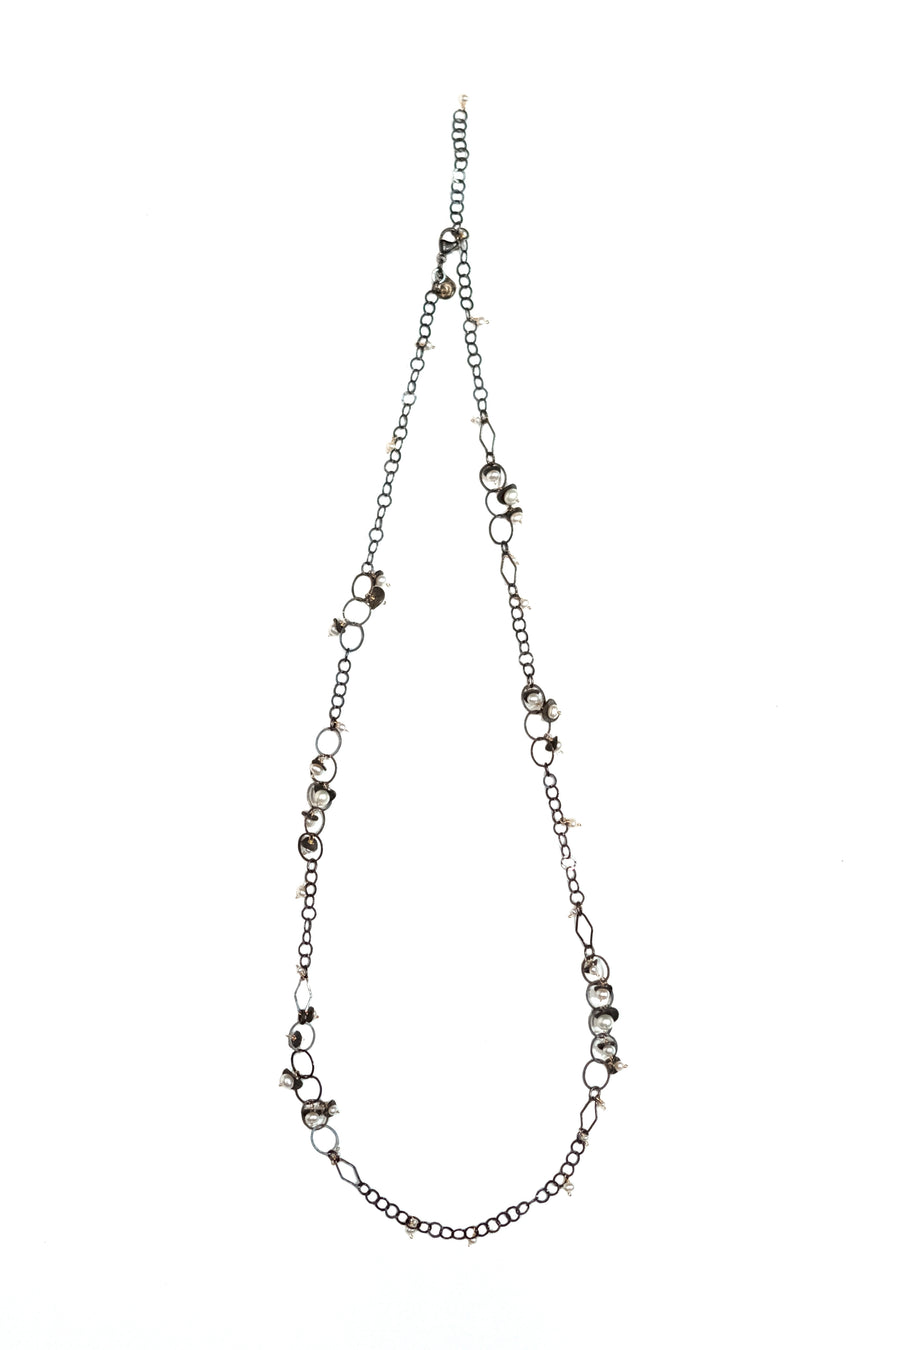 Sterling Silver and Freshwater Pearl Necklace by Calliope